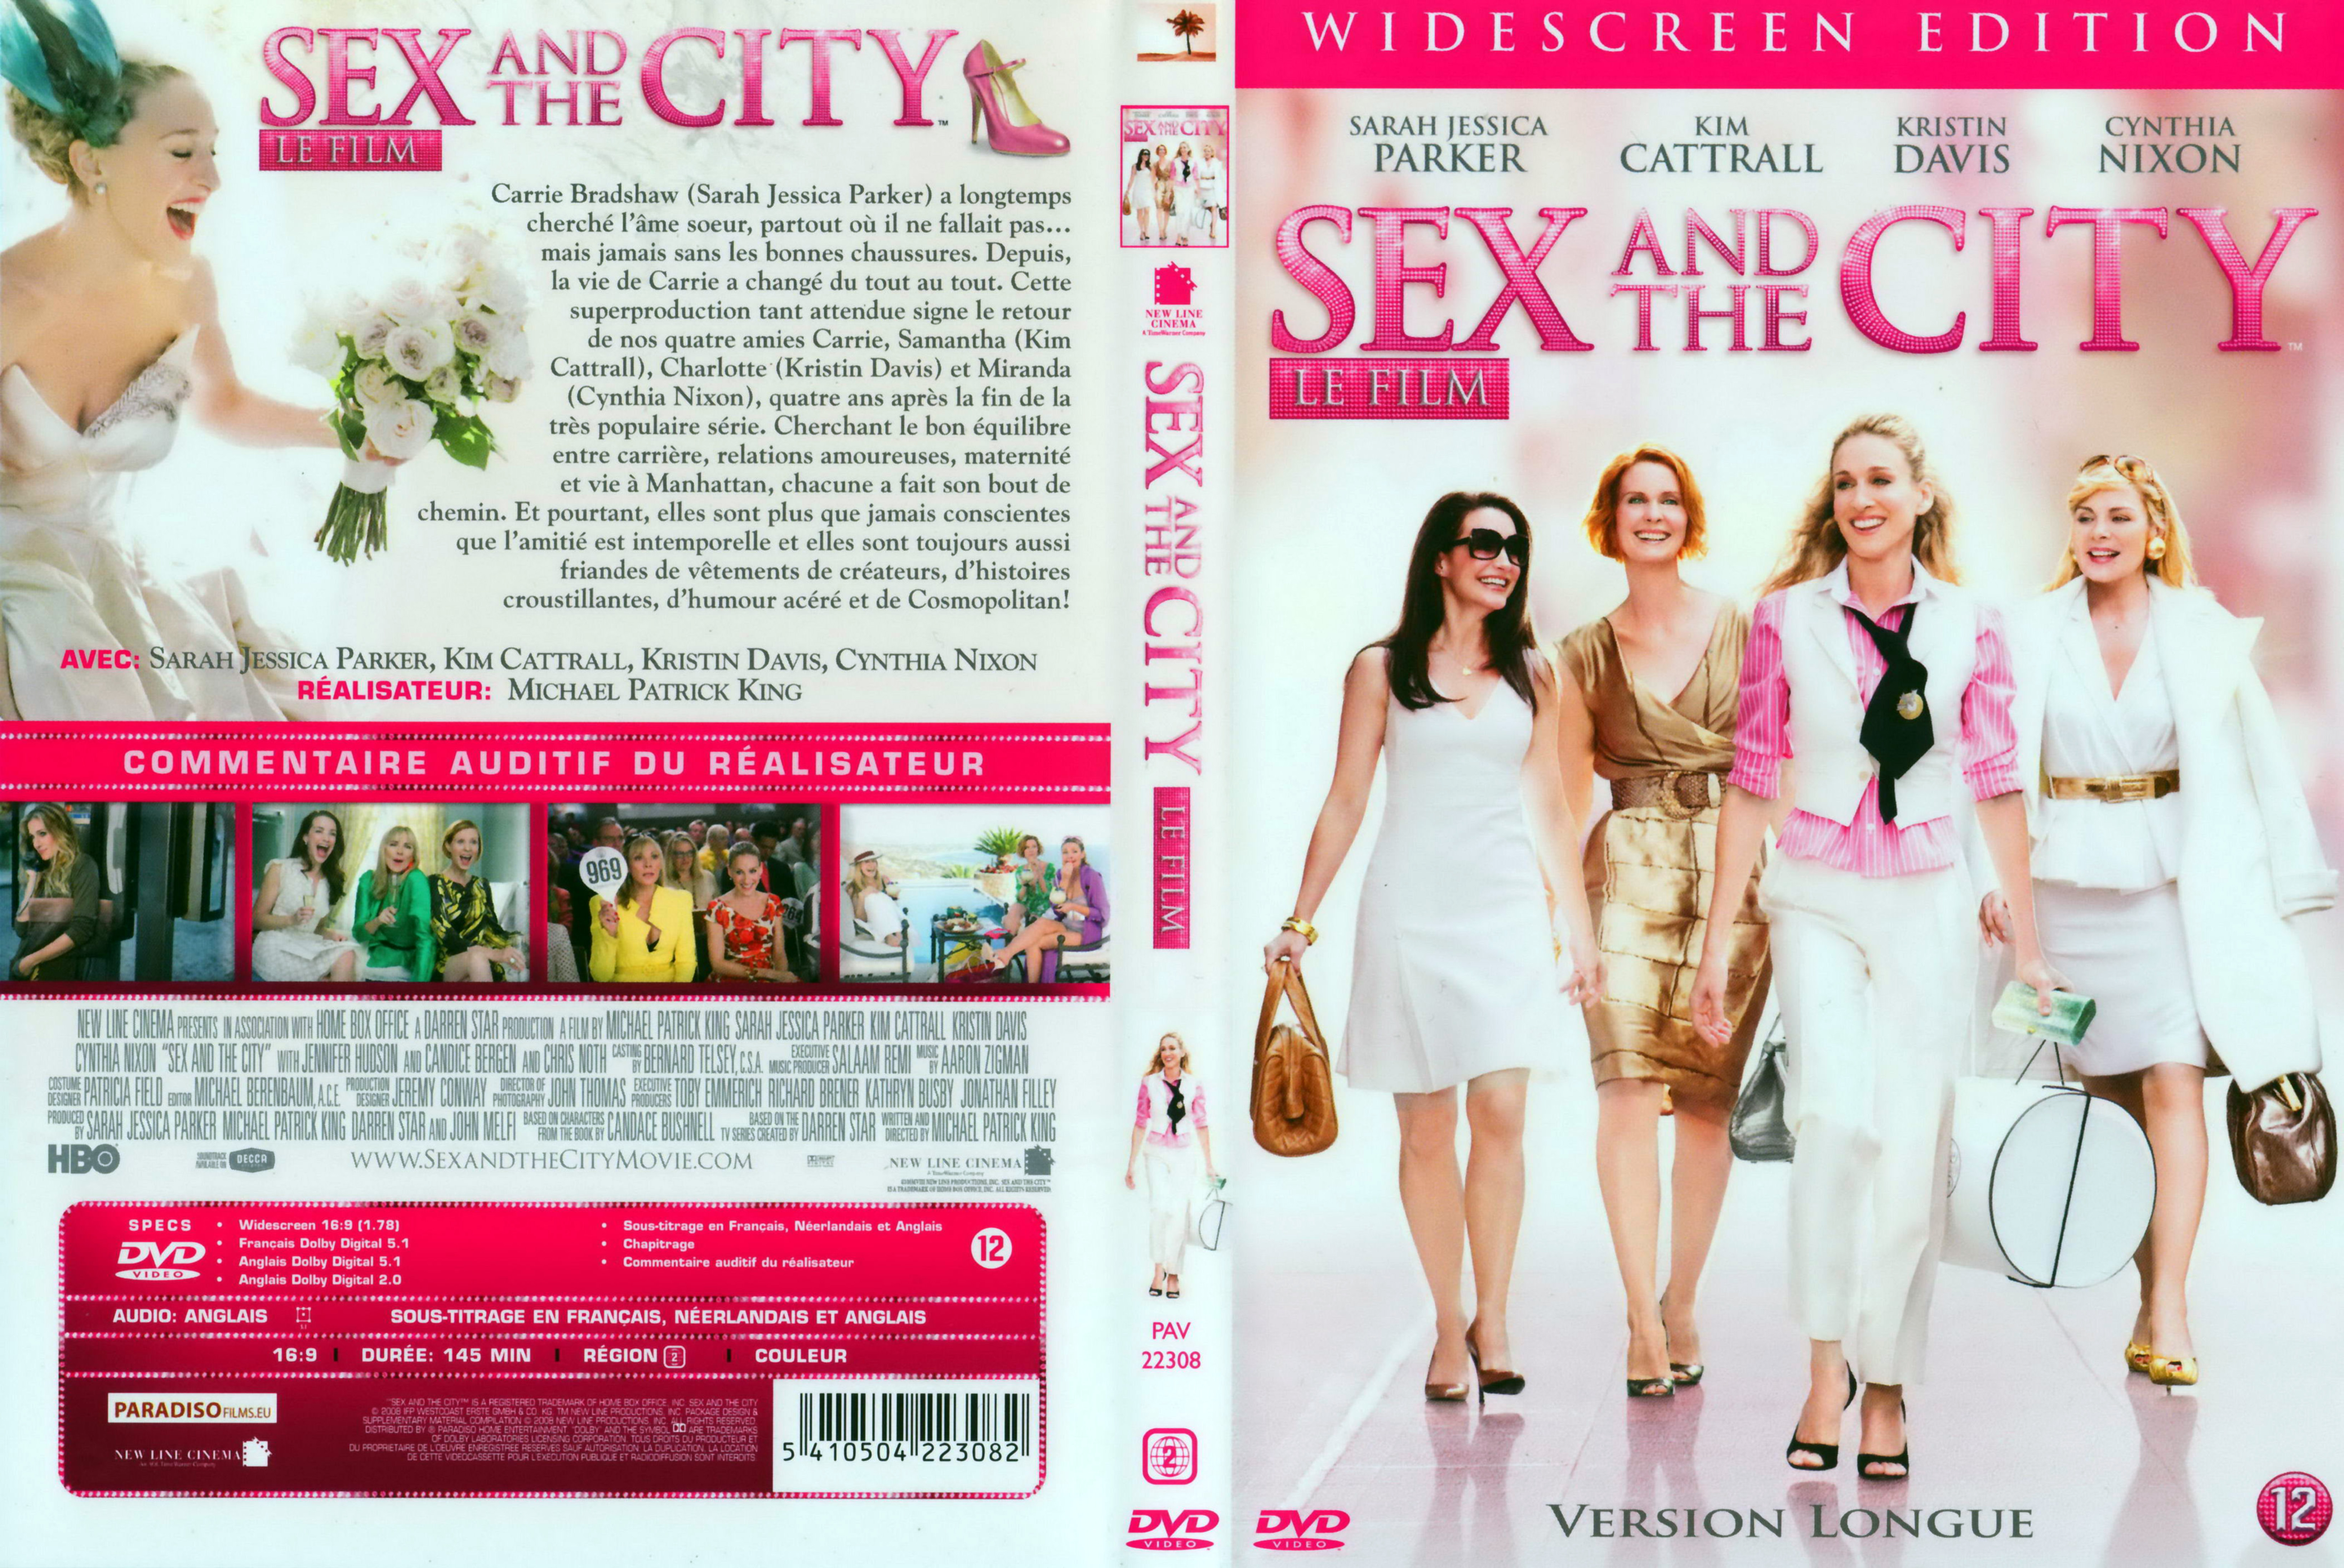 Jaquette DVD Sex and the city le film